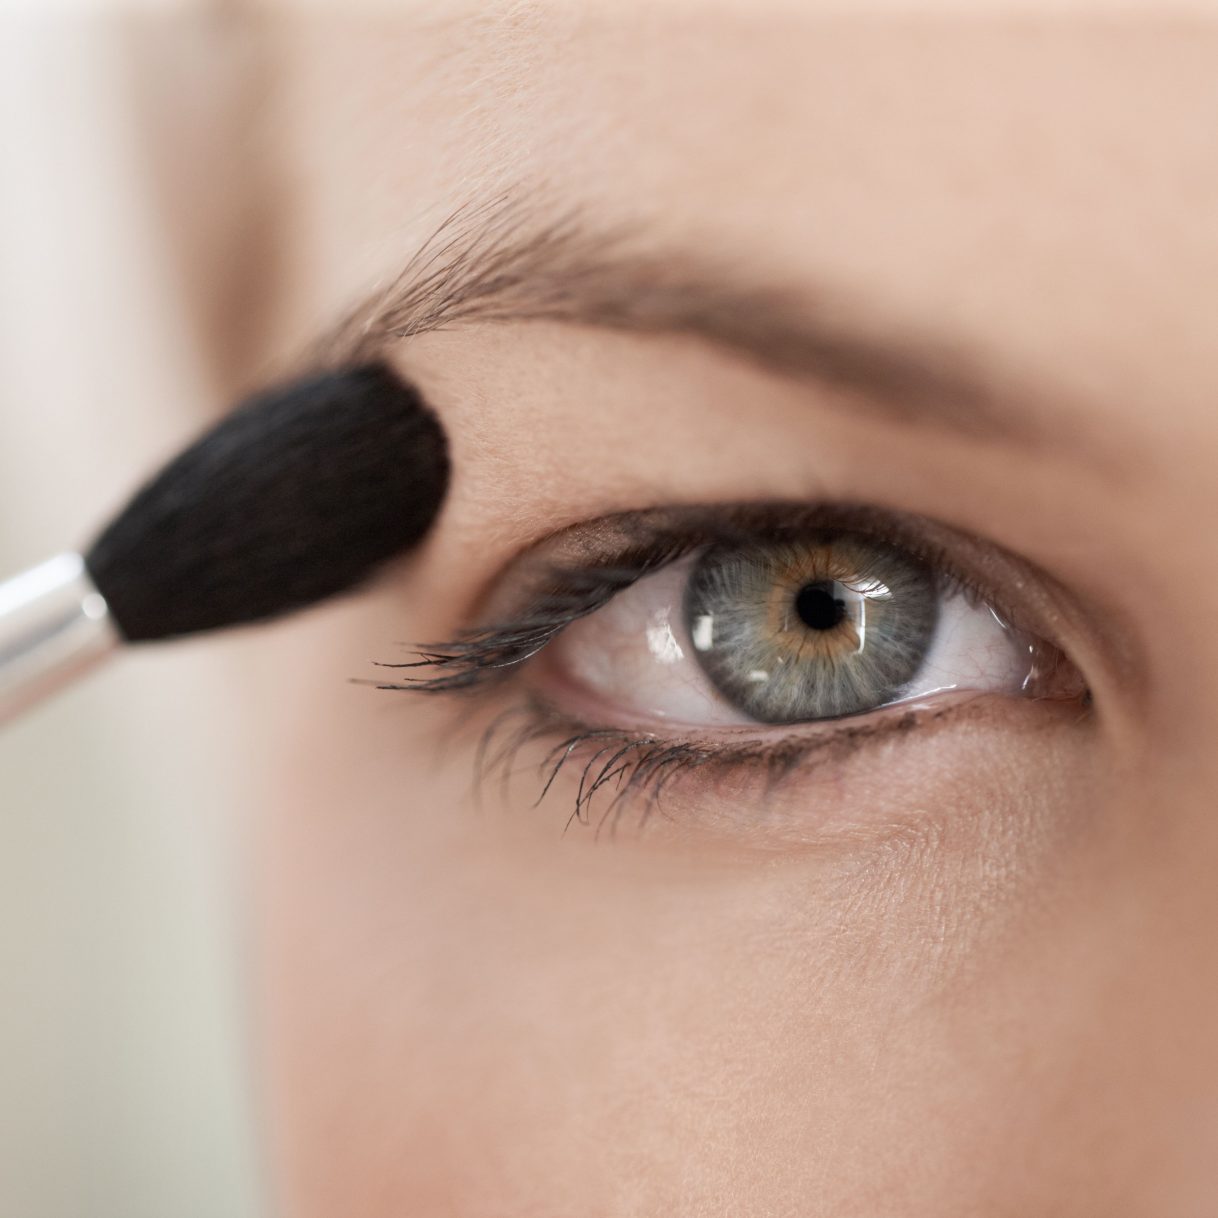 Pictures Of Eye Makeup Makeup Tricks For Hooded Eyes Hooded Eyes Makeup Tips And Tricks